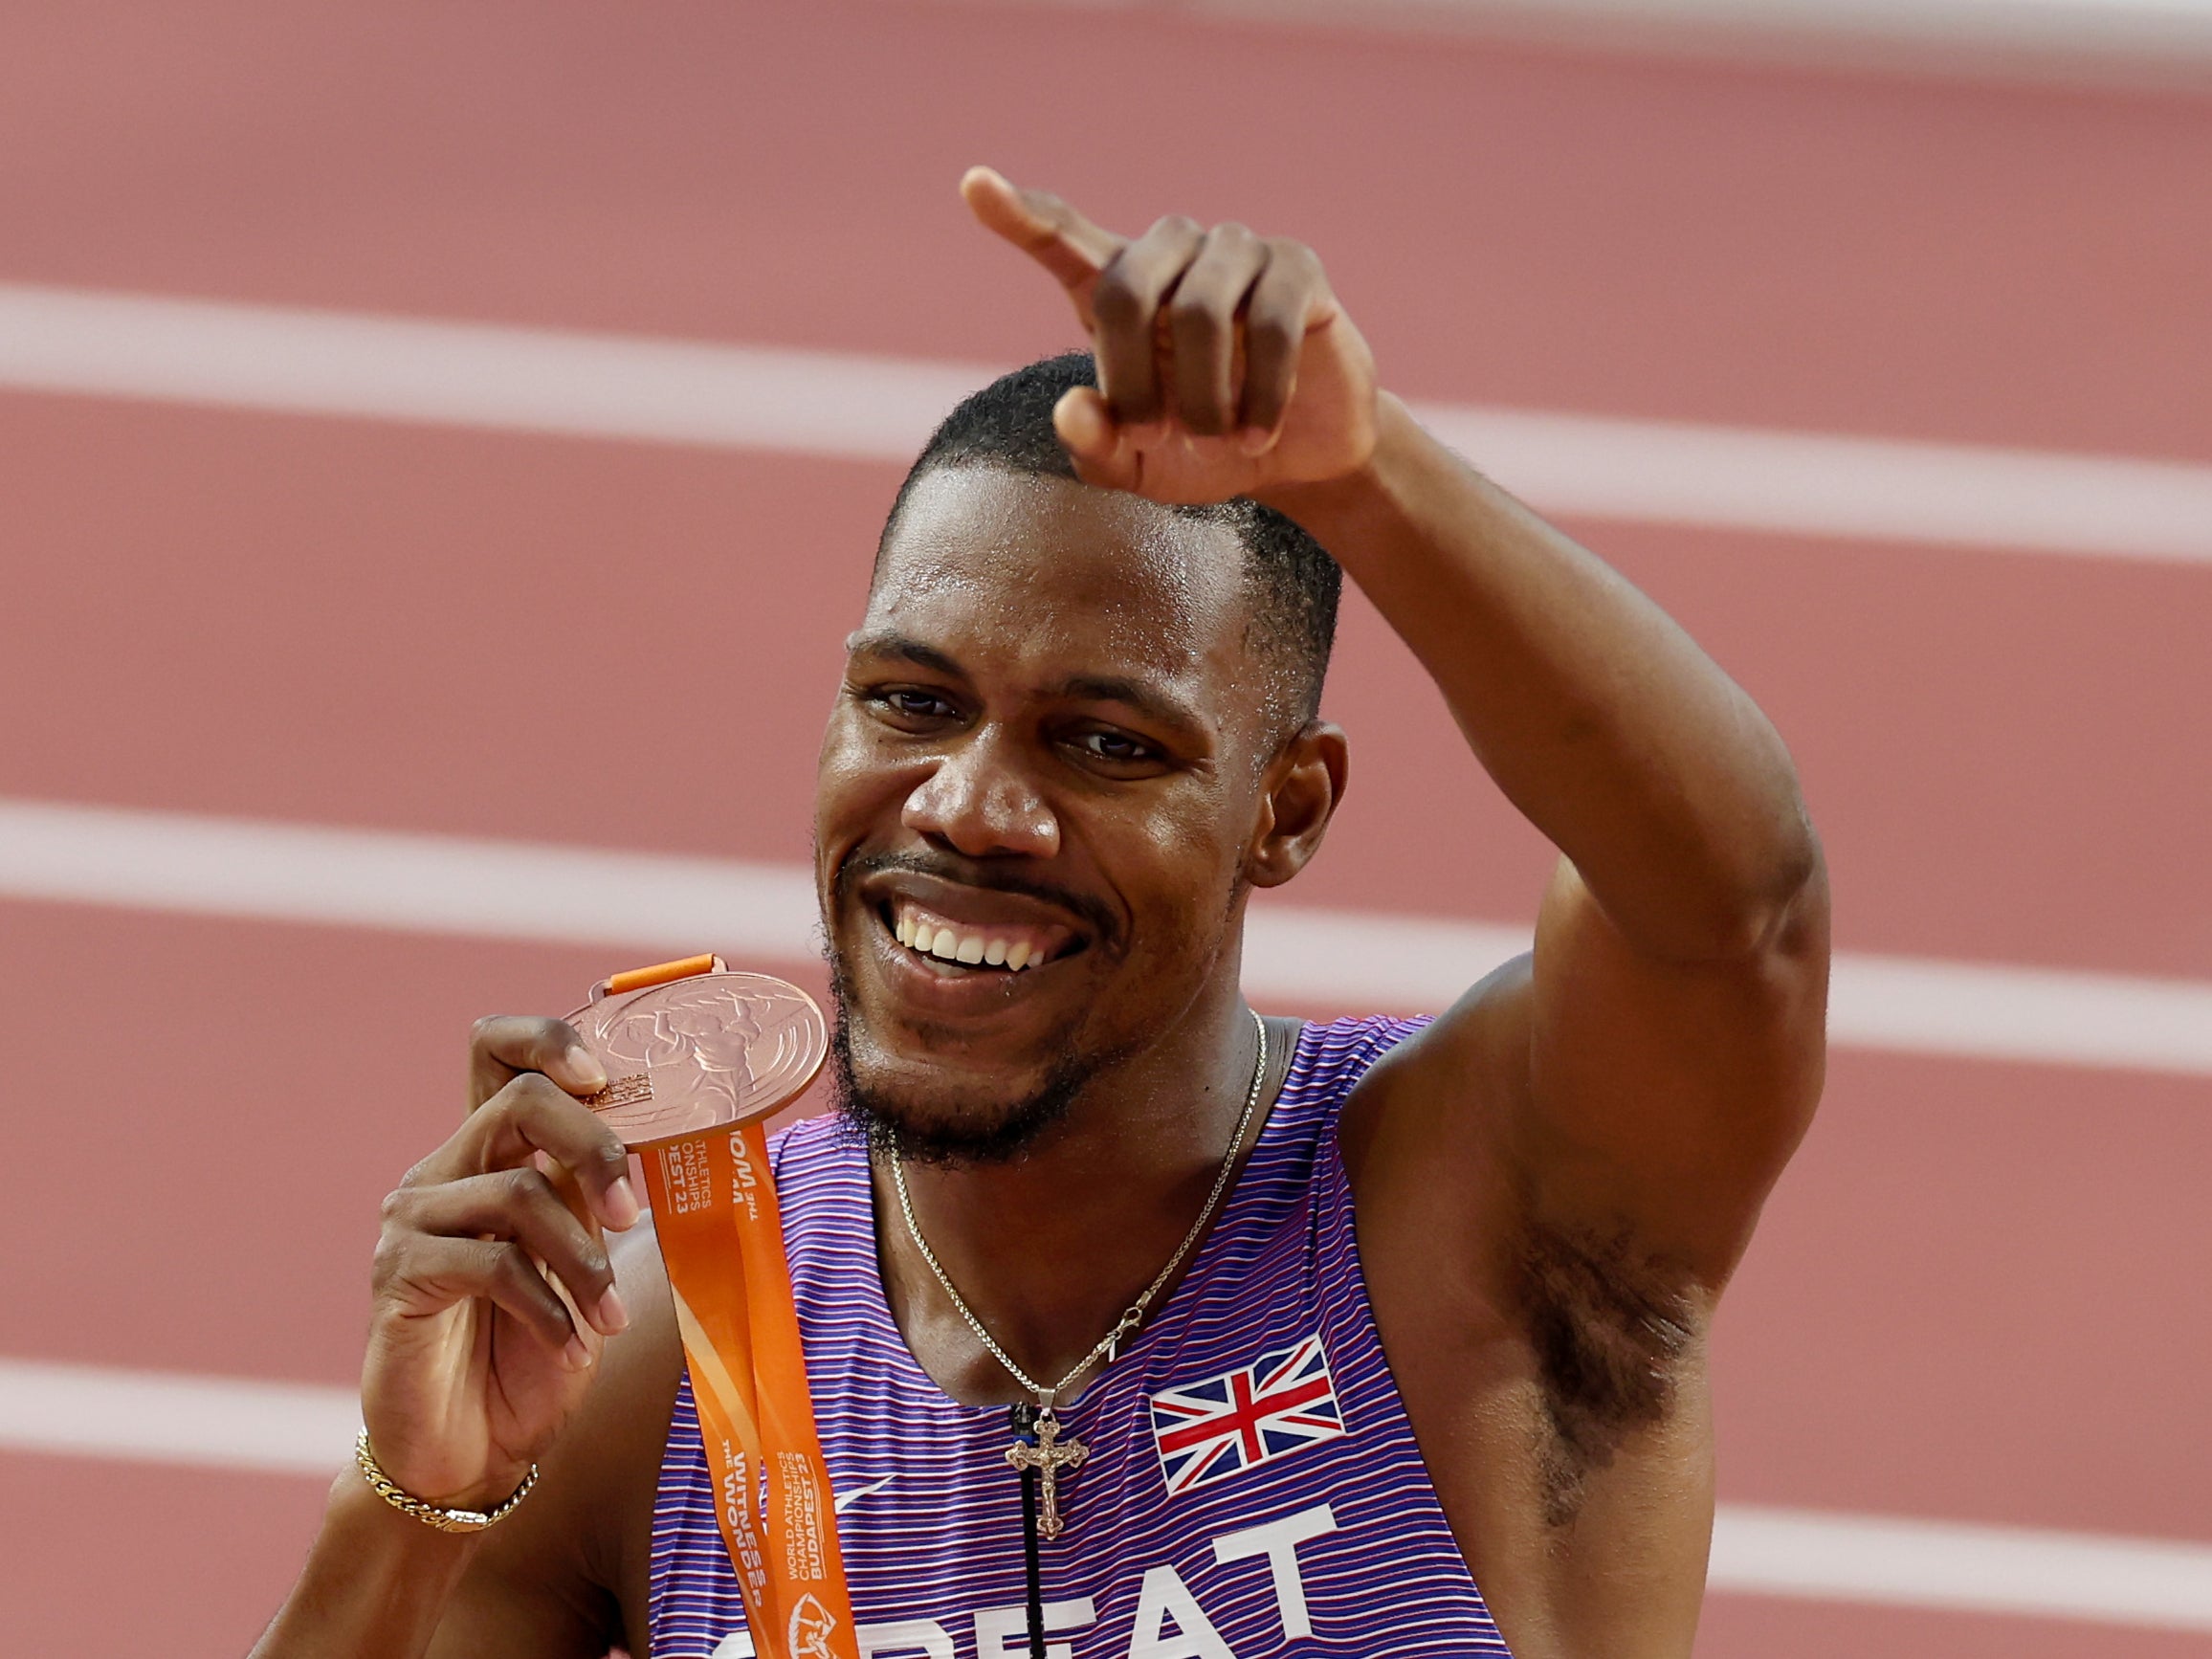 Hughes with his bronze medal